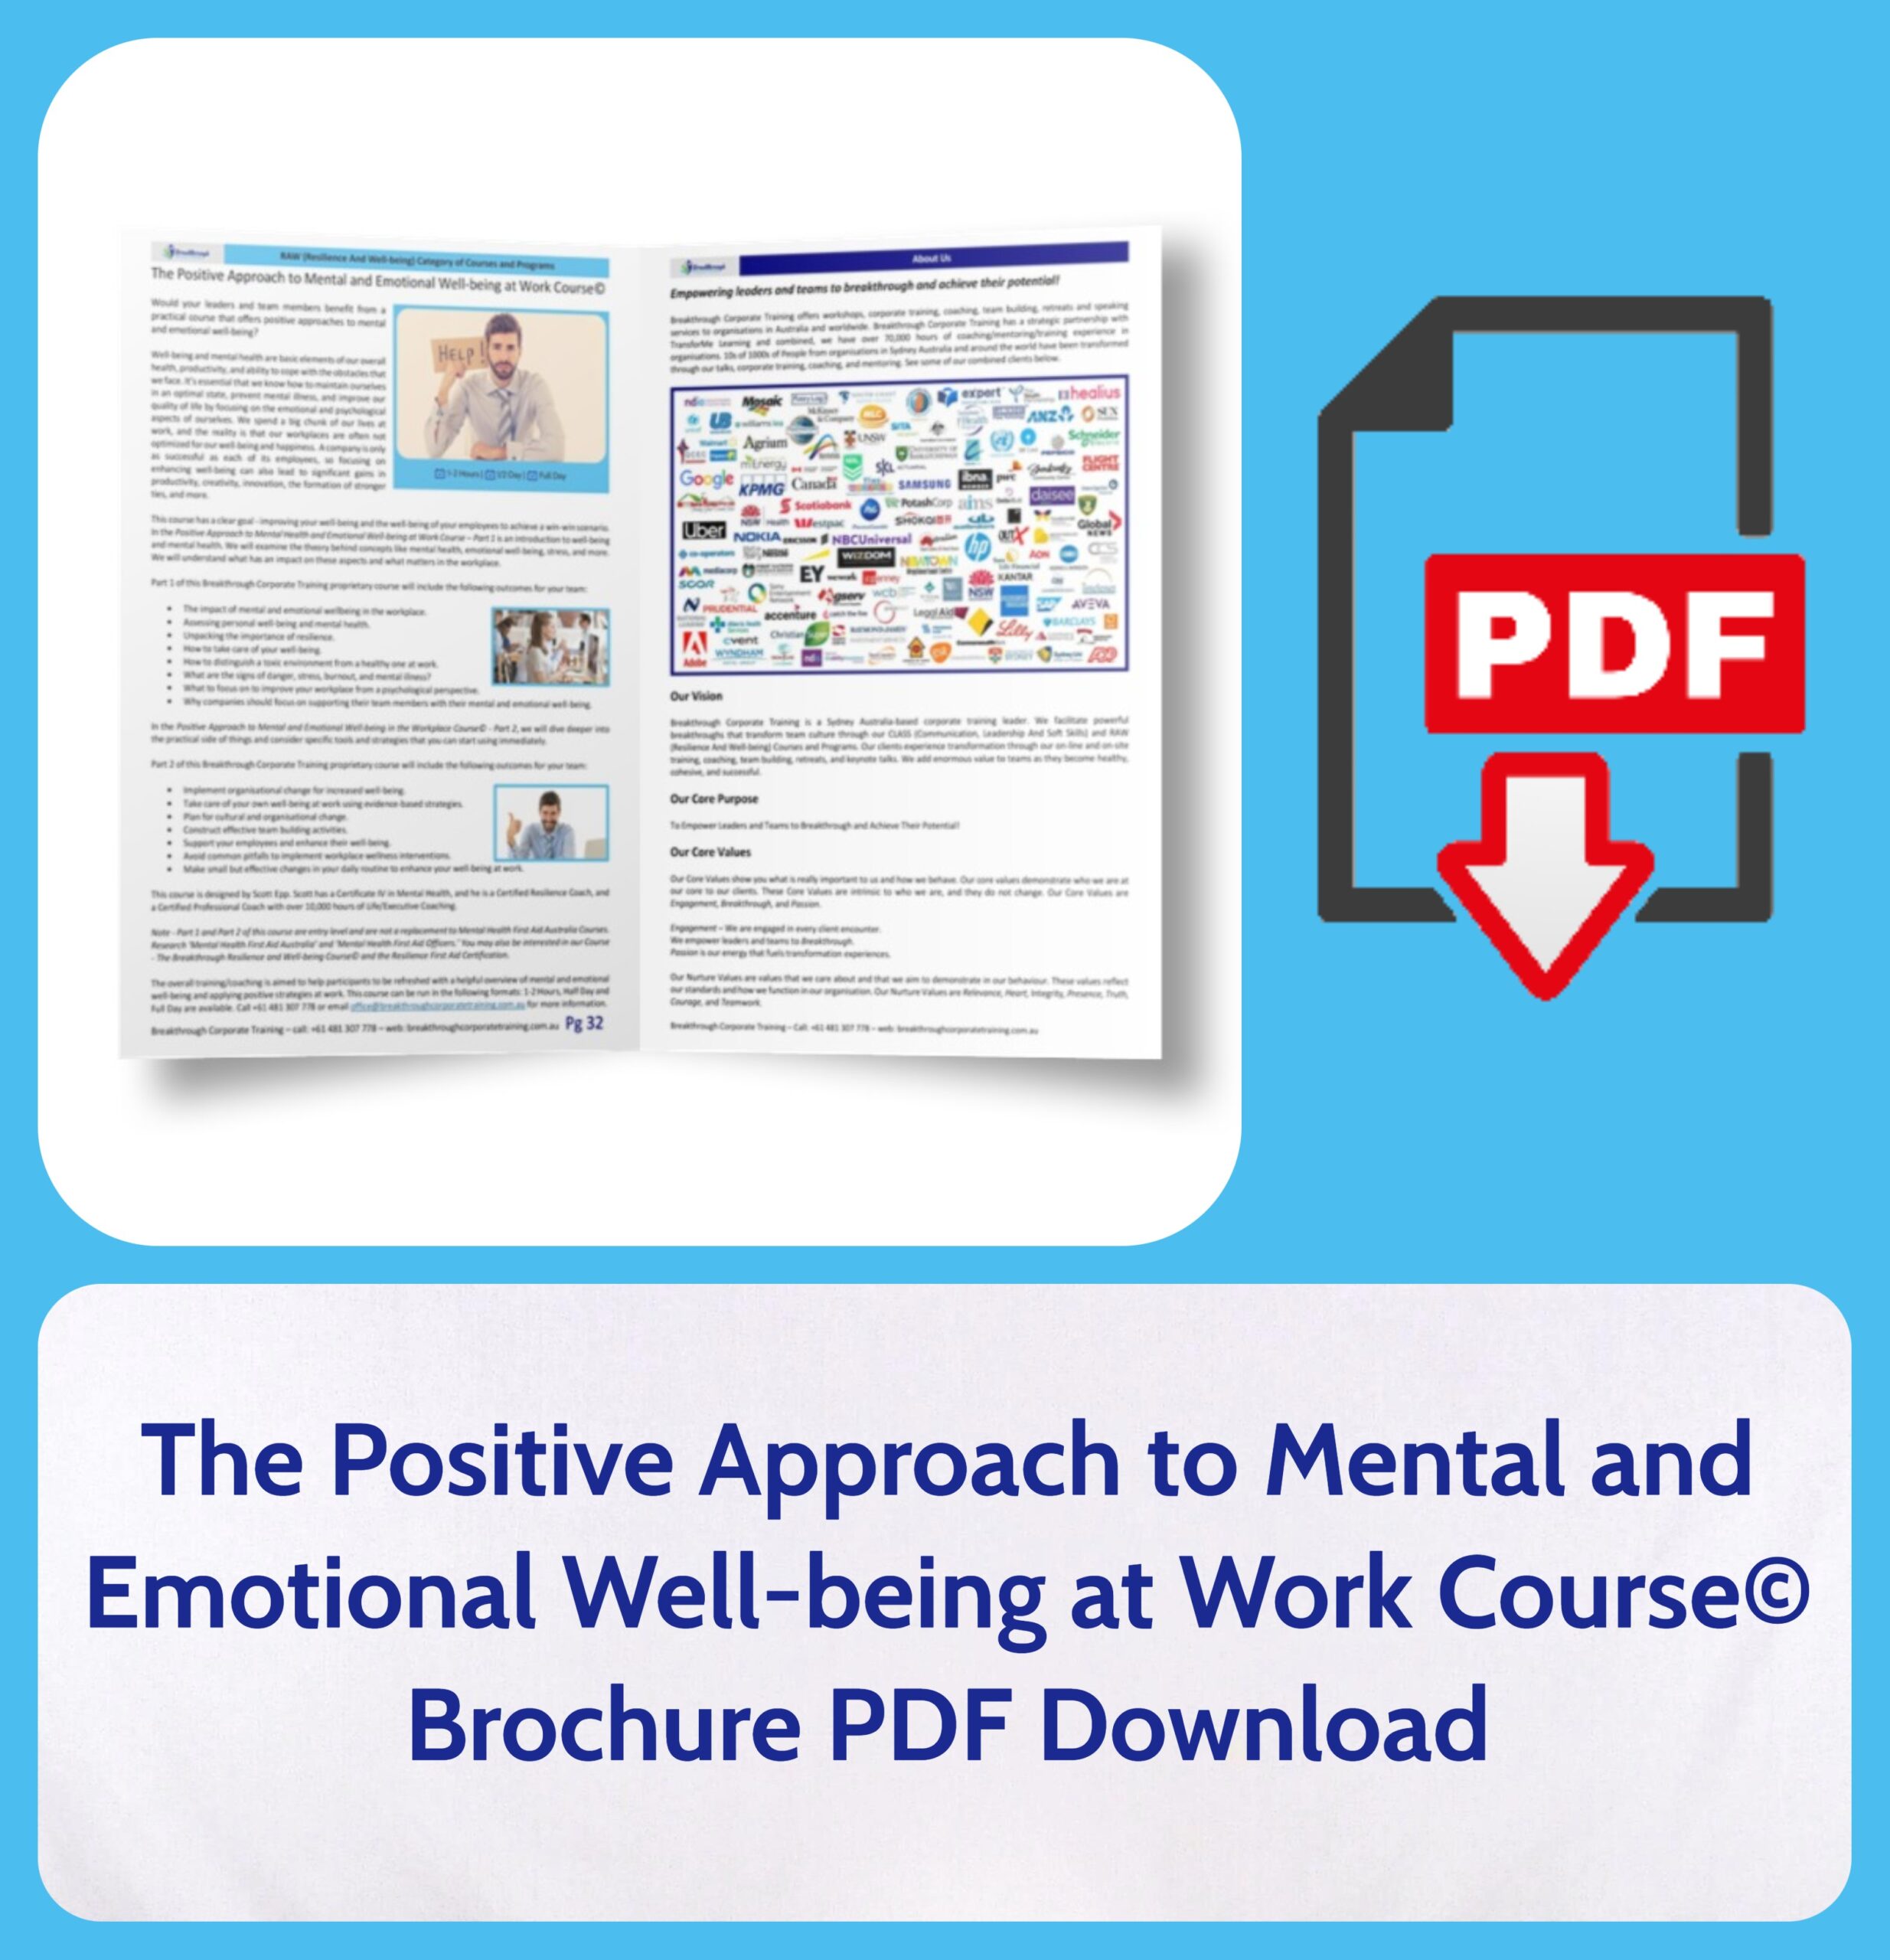 The Positive Approach to Mental and Emotional Well-being at Work Course